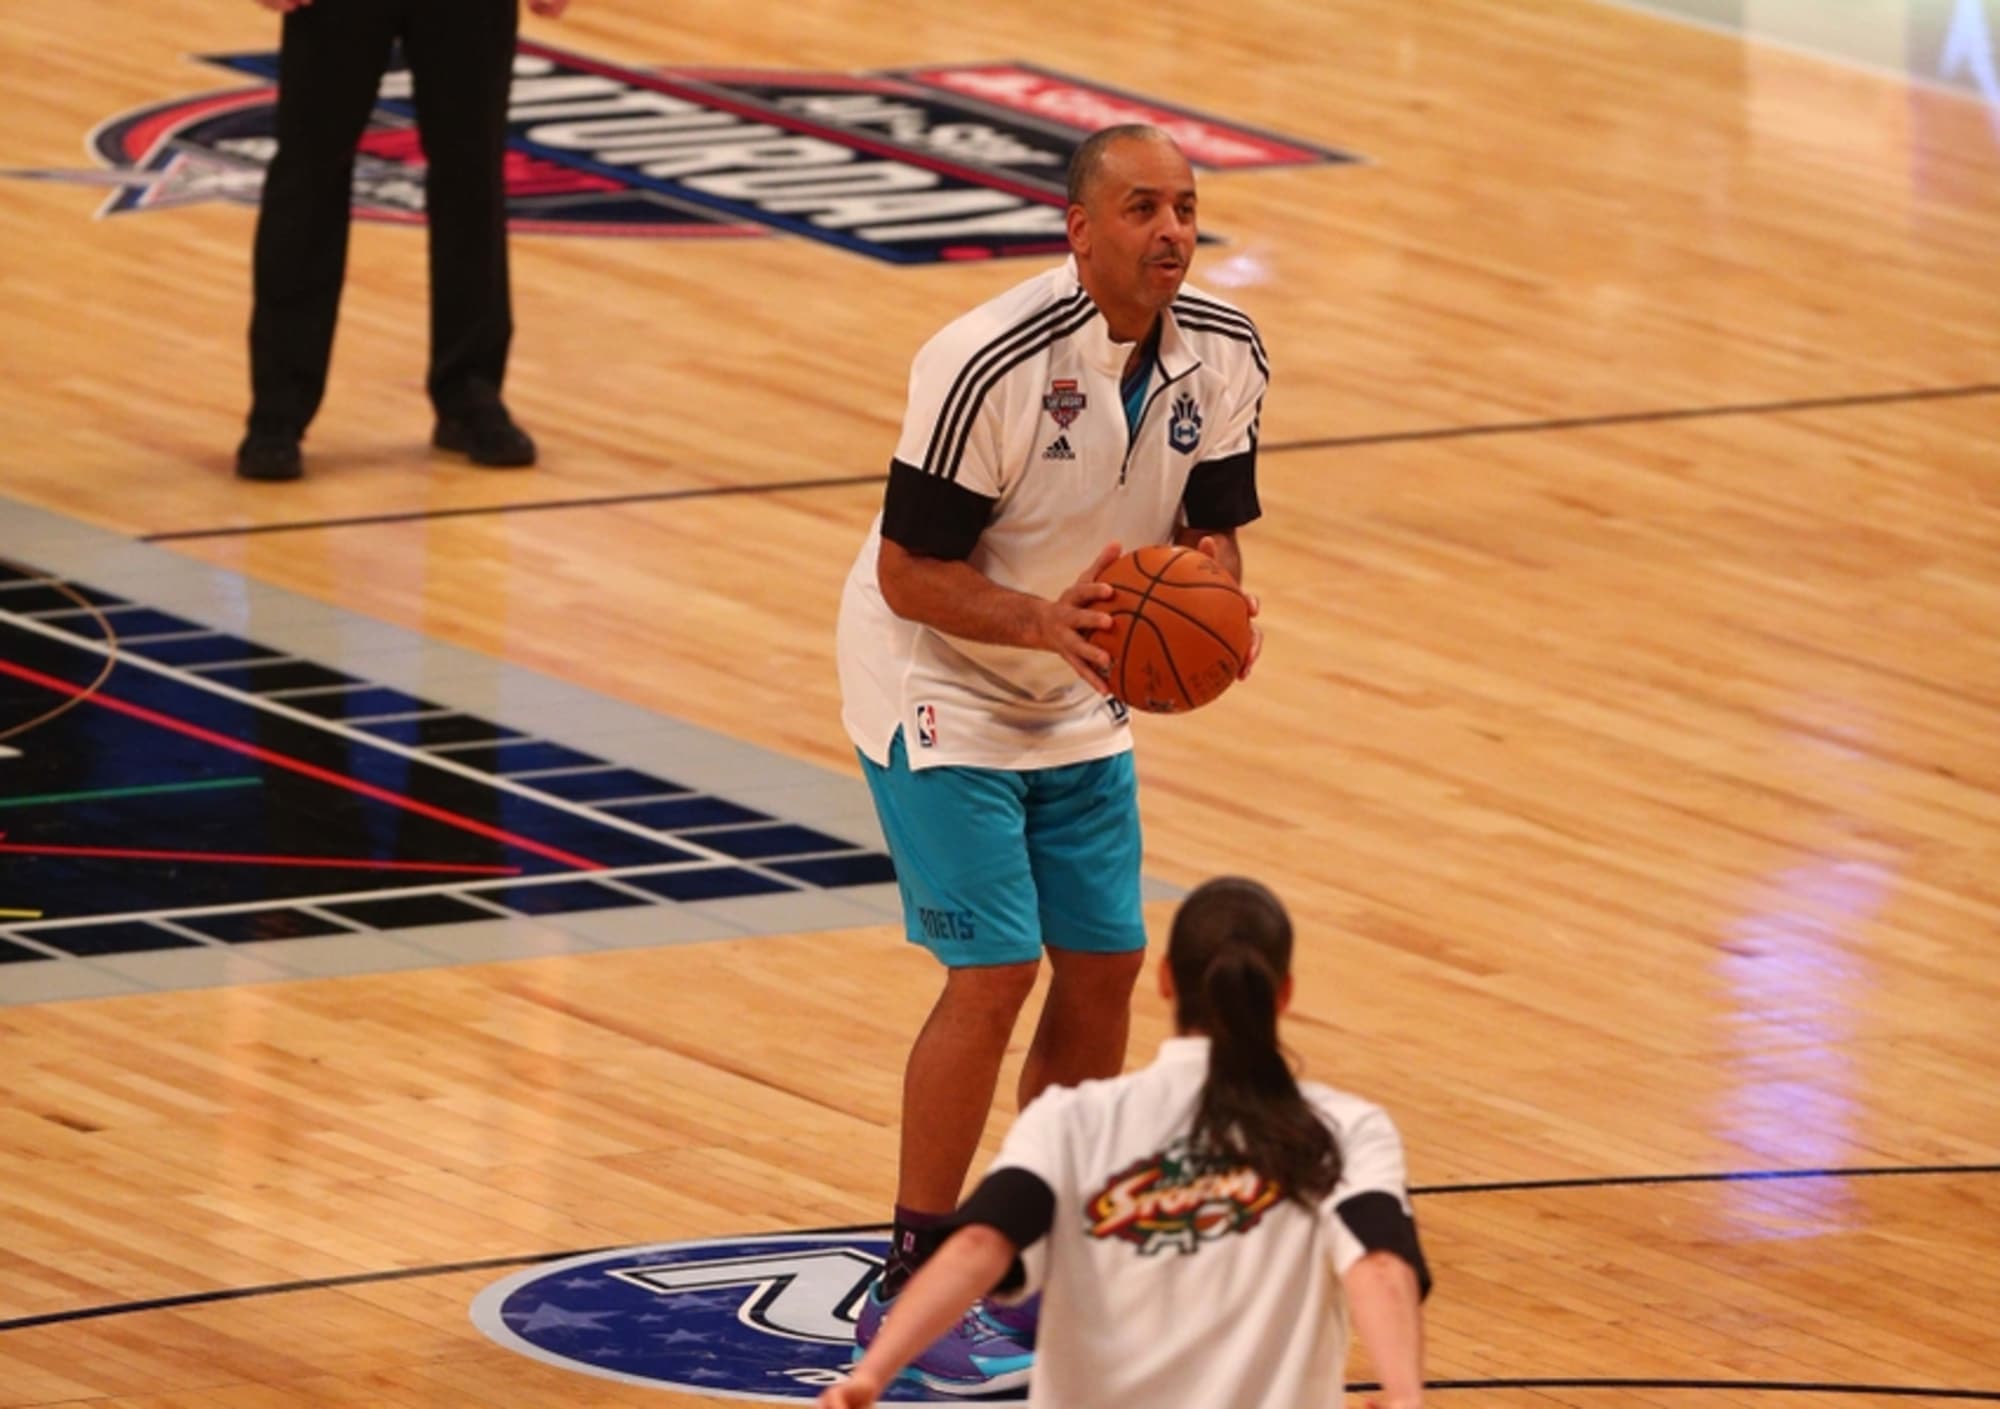 Charlotte Hornets: Dell Curry is Still a Great Three-Point Shooter